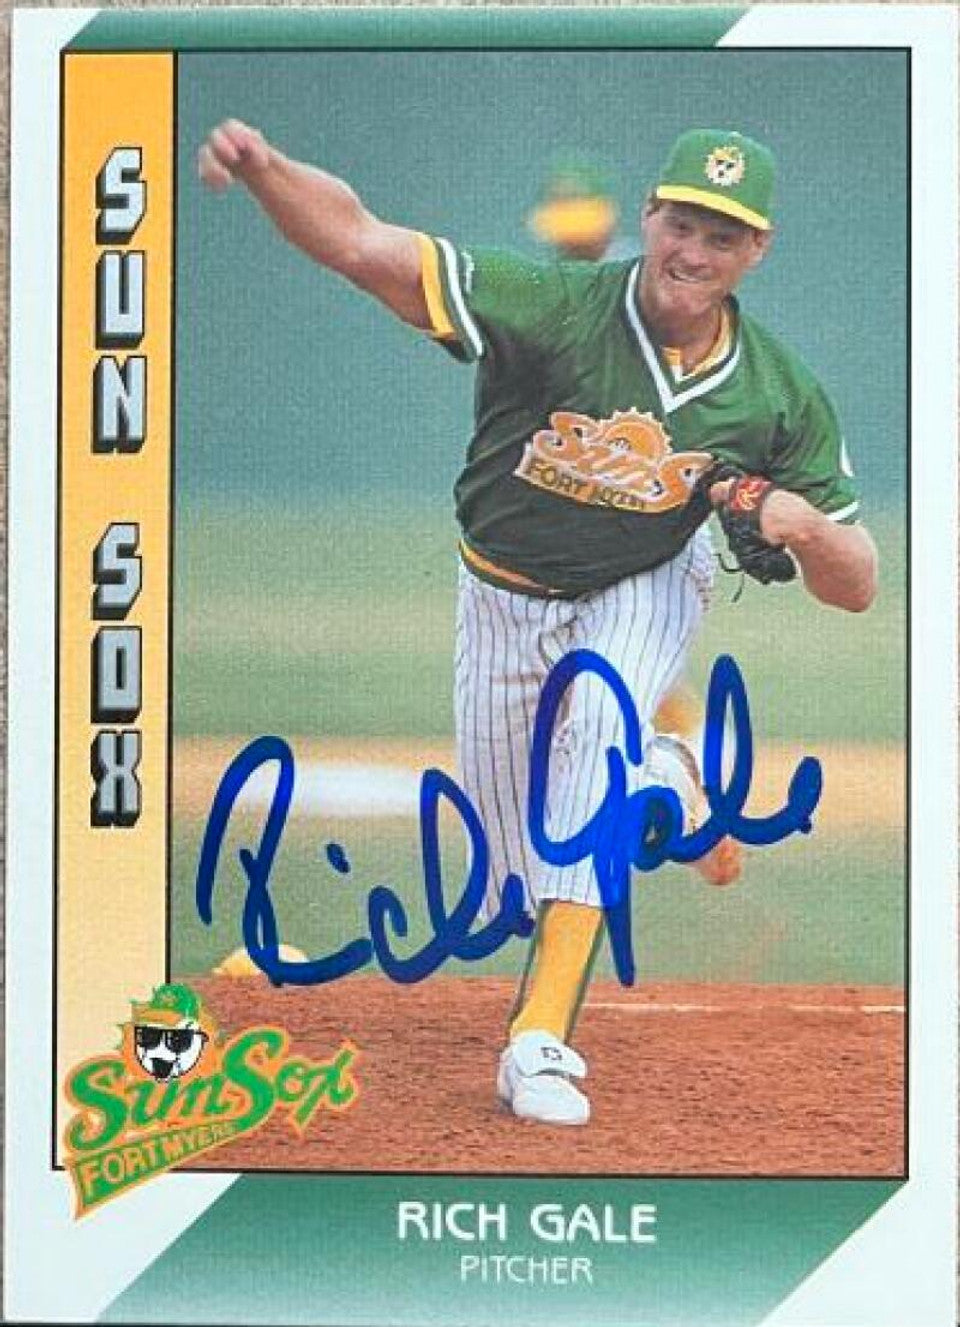 Rich Gale Signed 1991 Pacific Senior League Baseball Card - Fort Myers Sun Sox